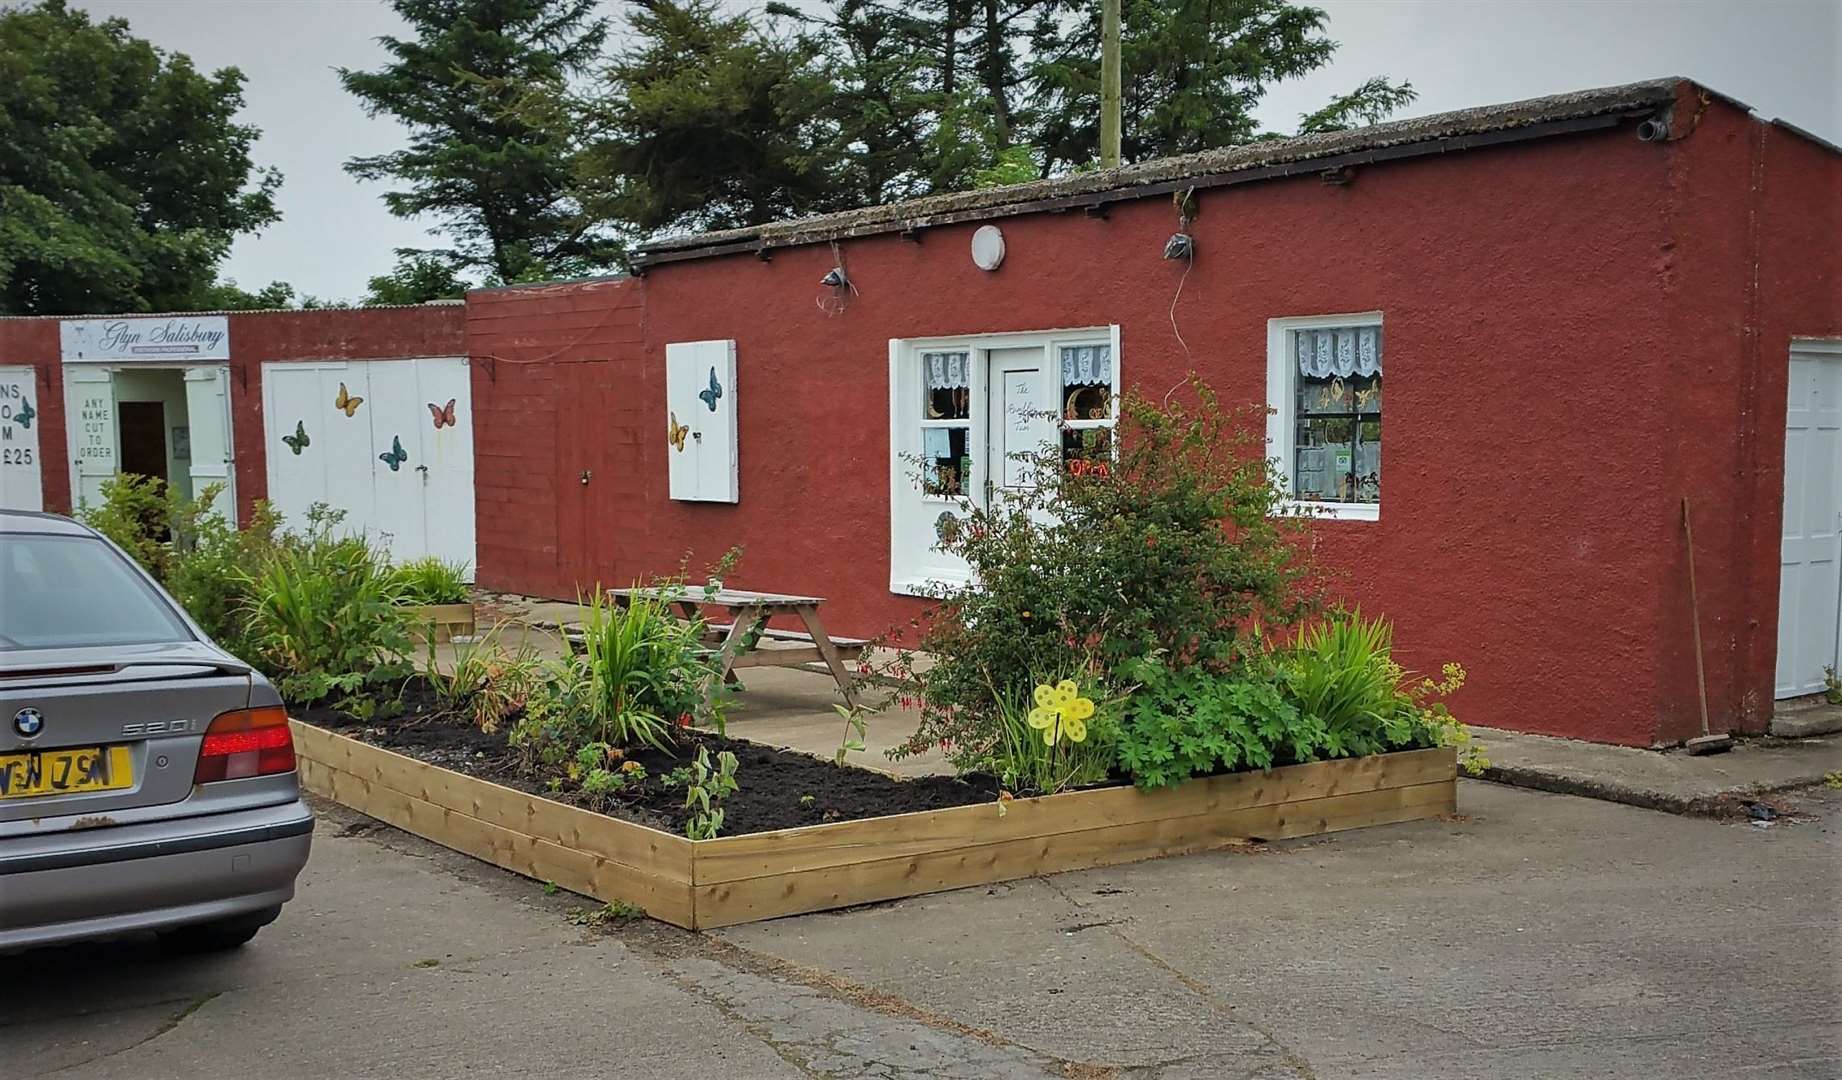 The popular Rumbin' Tum cafe at Lochshell showing the planter before it was destroyed.